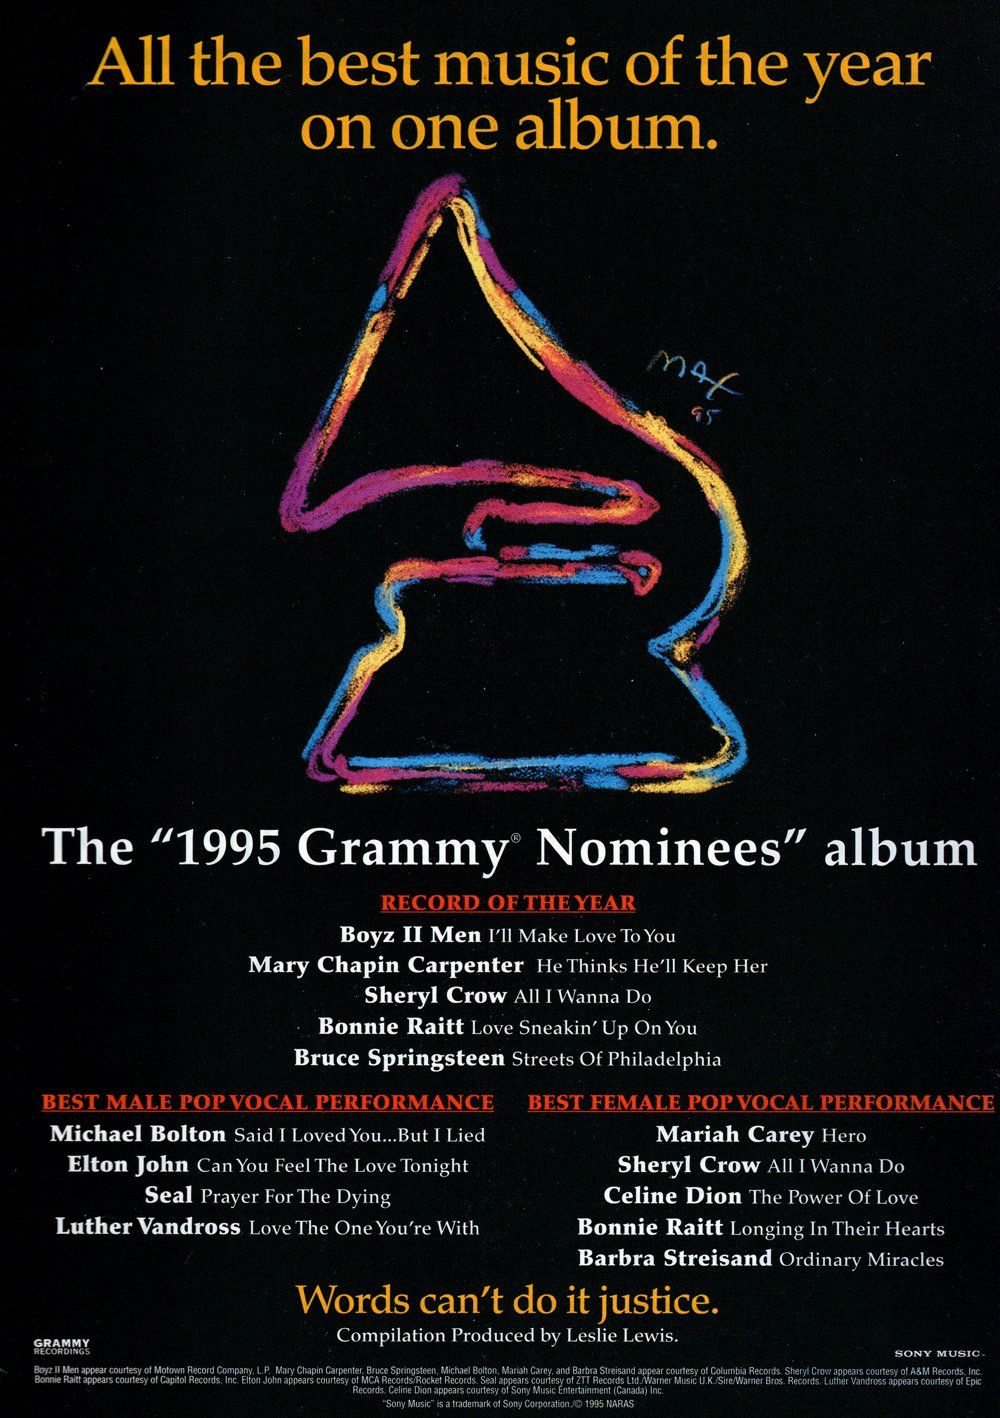 Advertisement for the 1995 Grammy Nominees CD